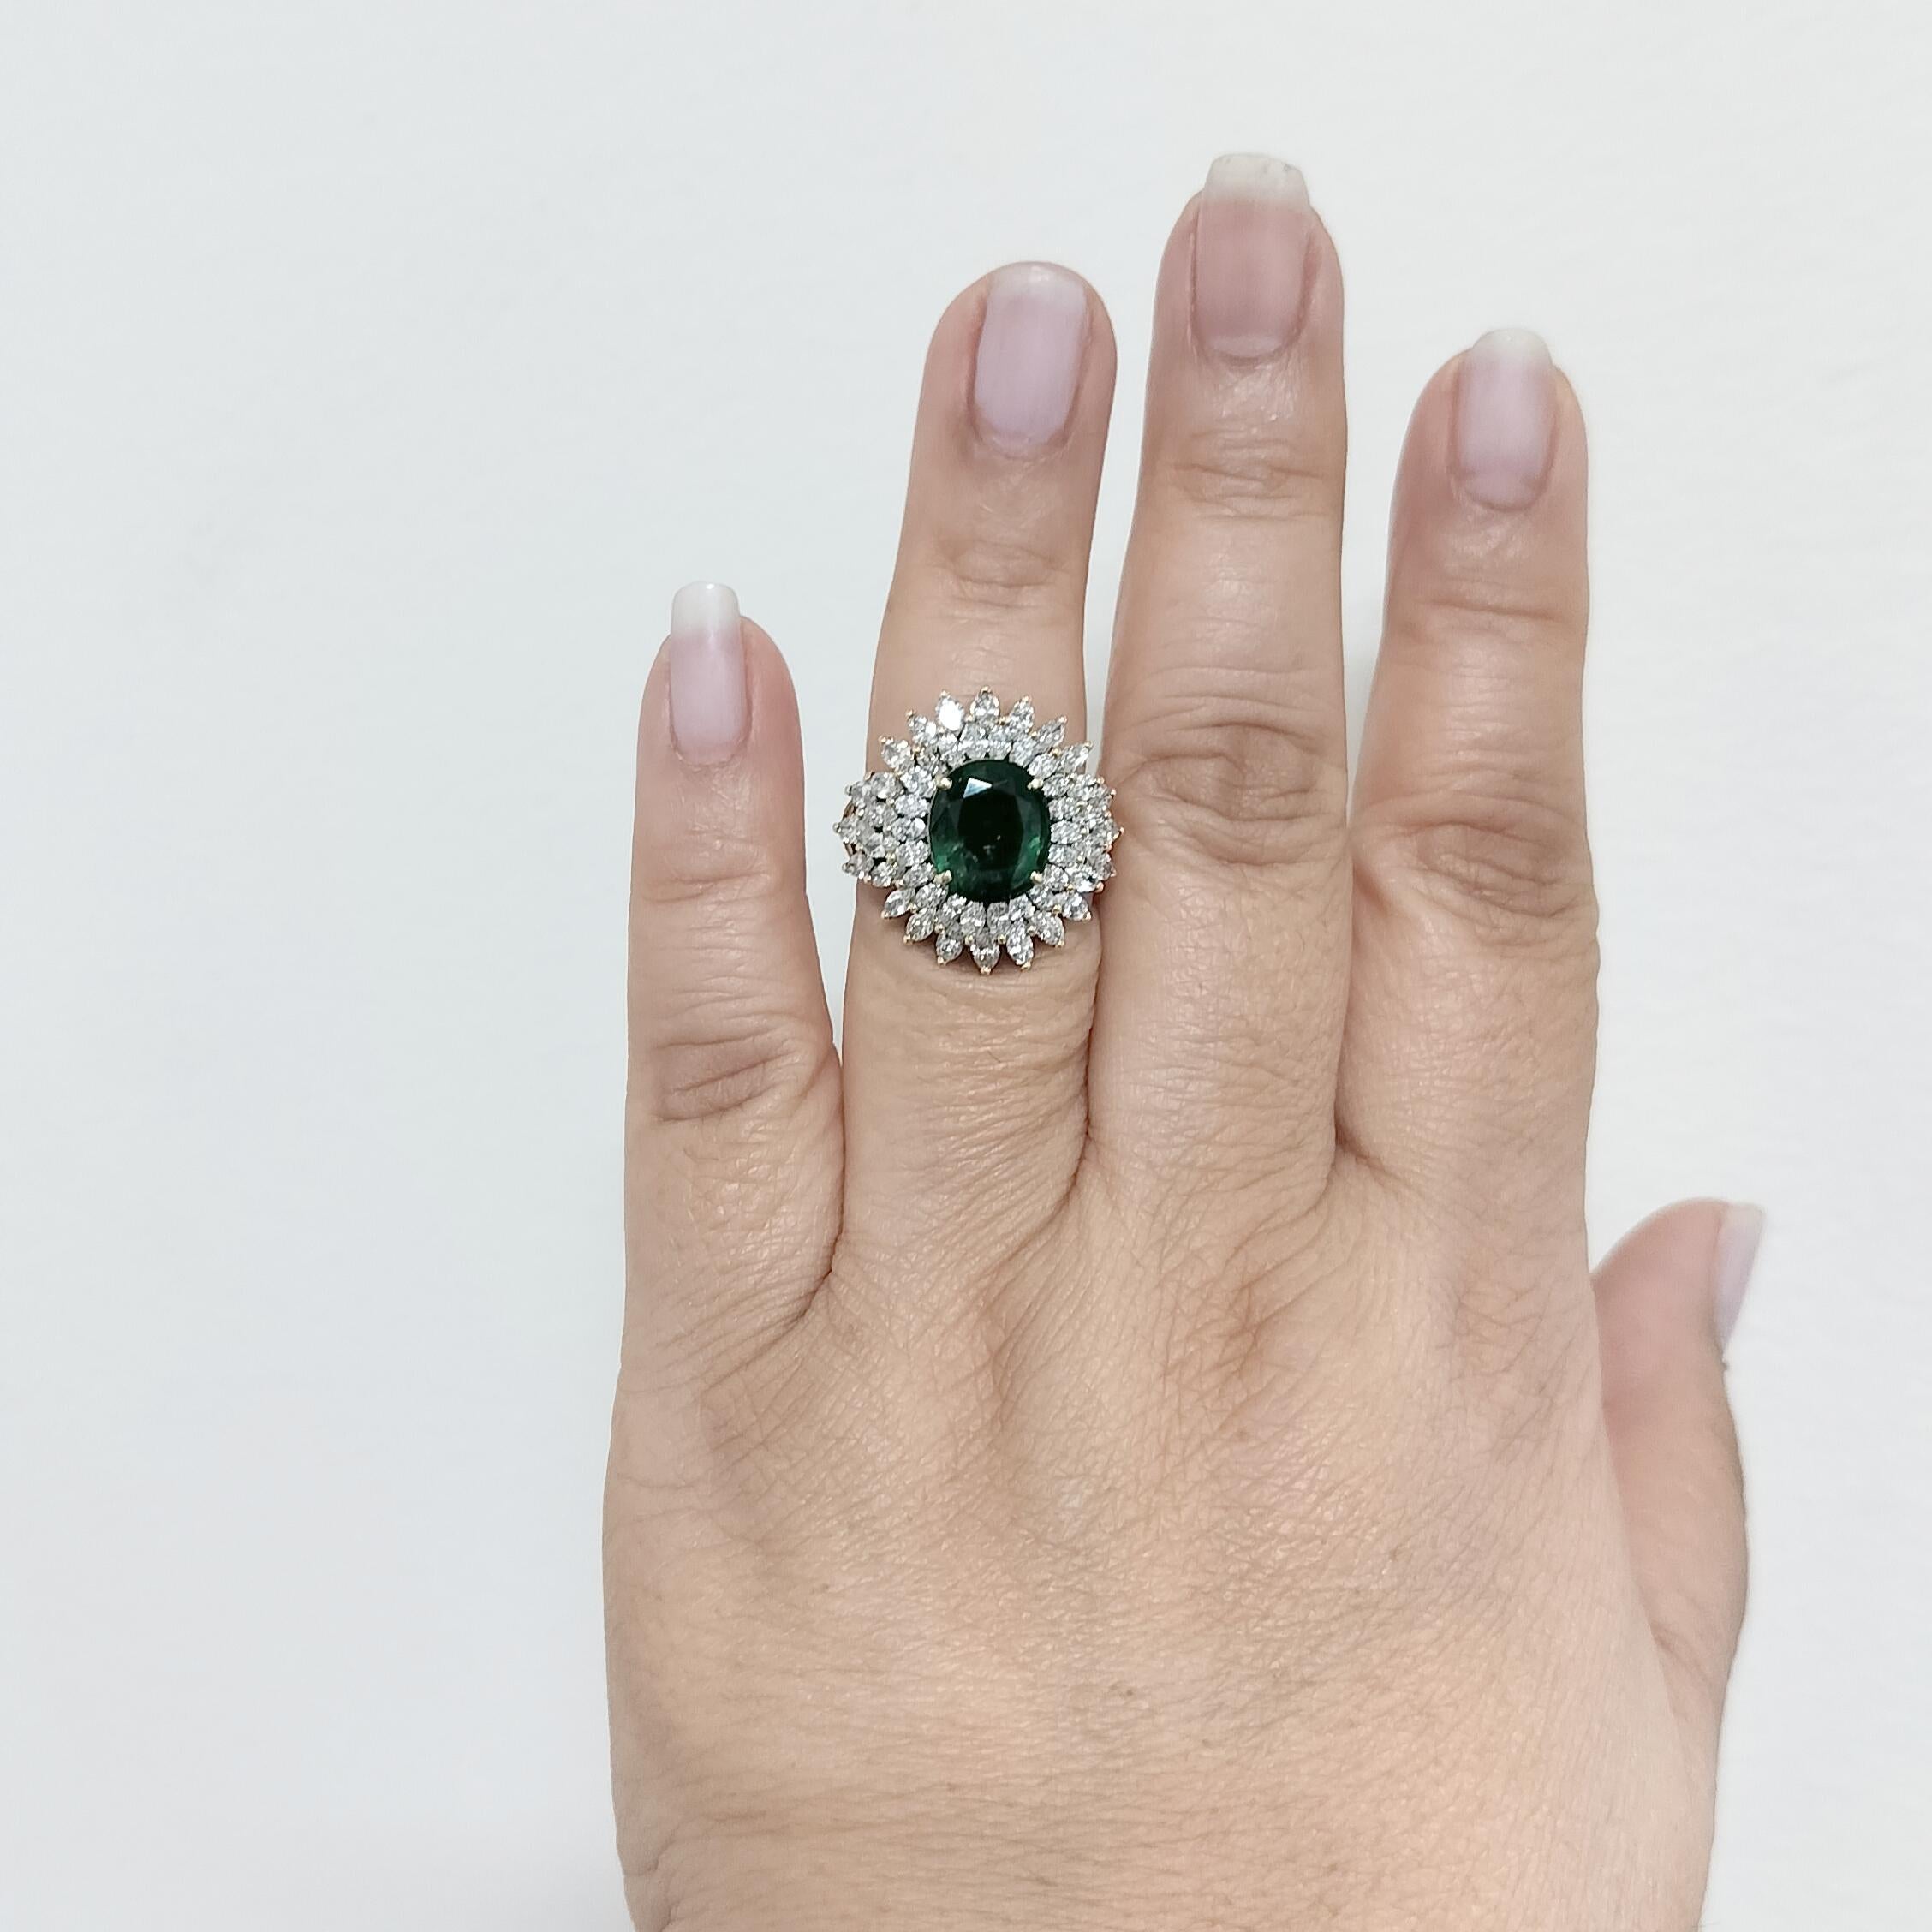 Beautiful big emerald oval (approximately 4 ct) with good quality white diamond marquise shapes.  Handmade in 18k yellow gold.  Ring size 7.